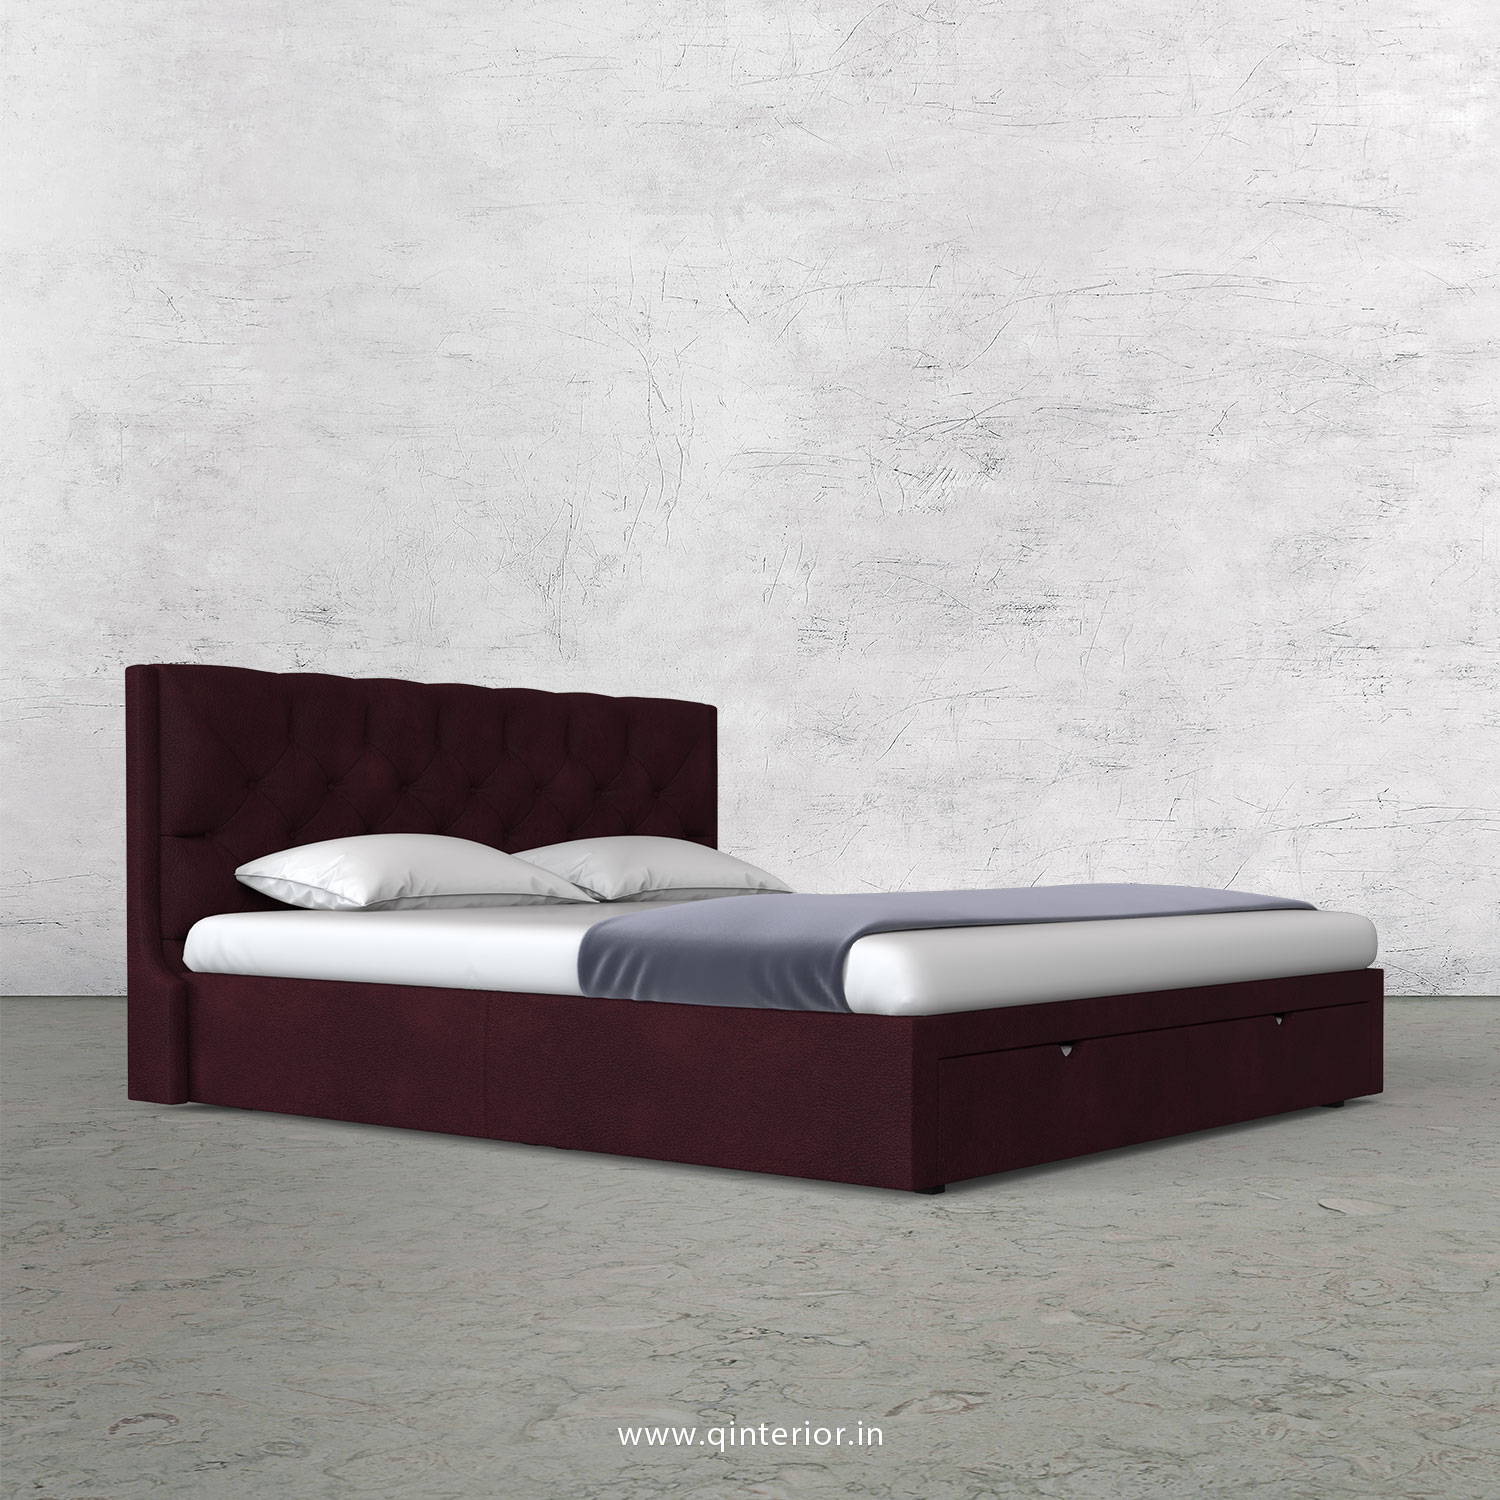 Scorpius King Size Storage Bed in Fab Leather Fabric - KBD001 FL12